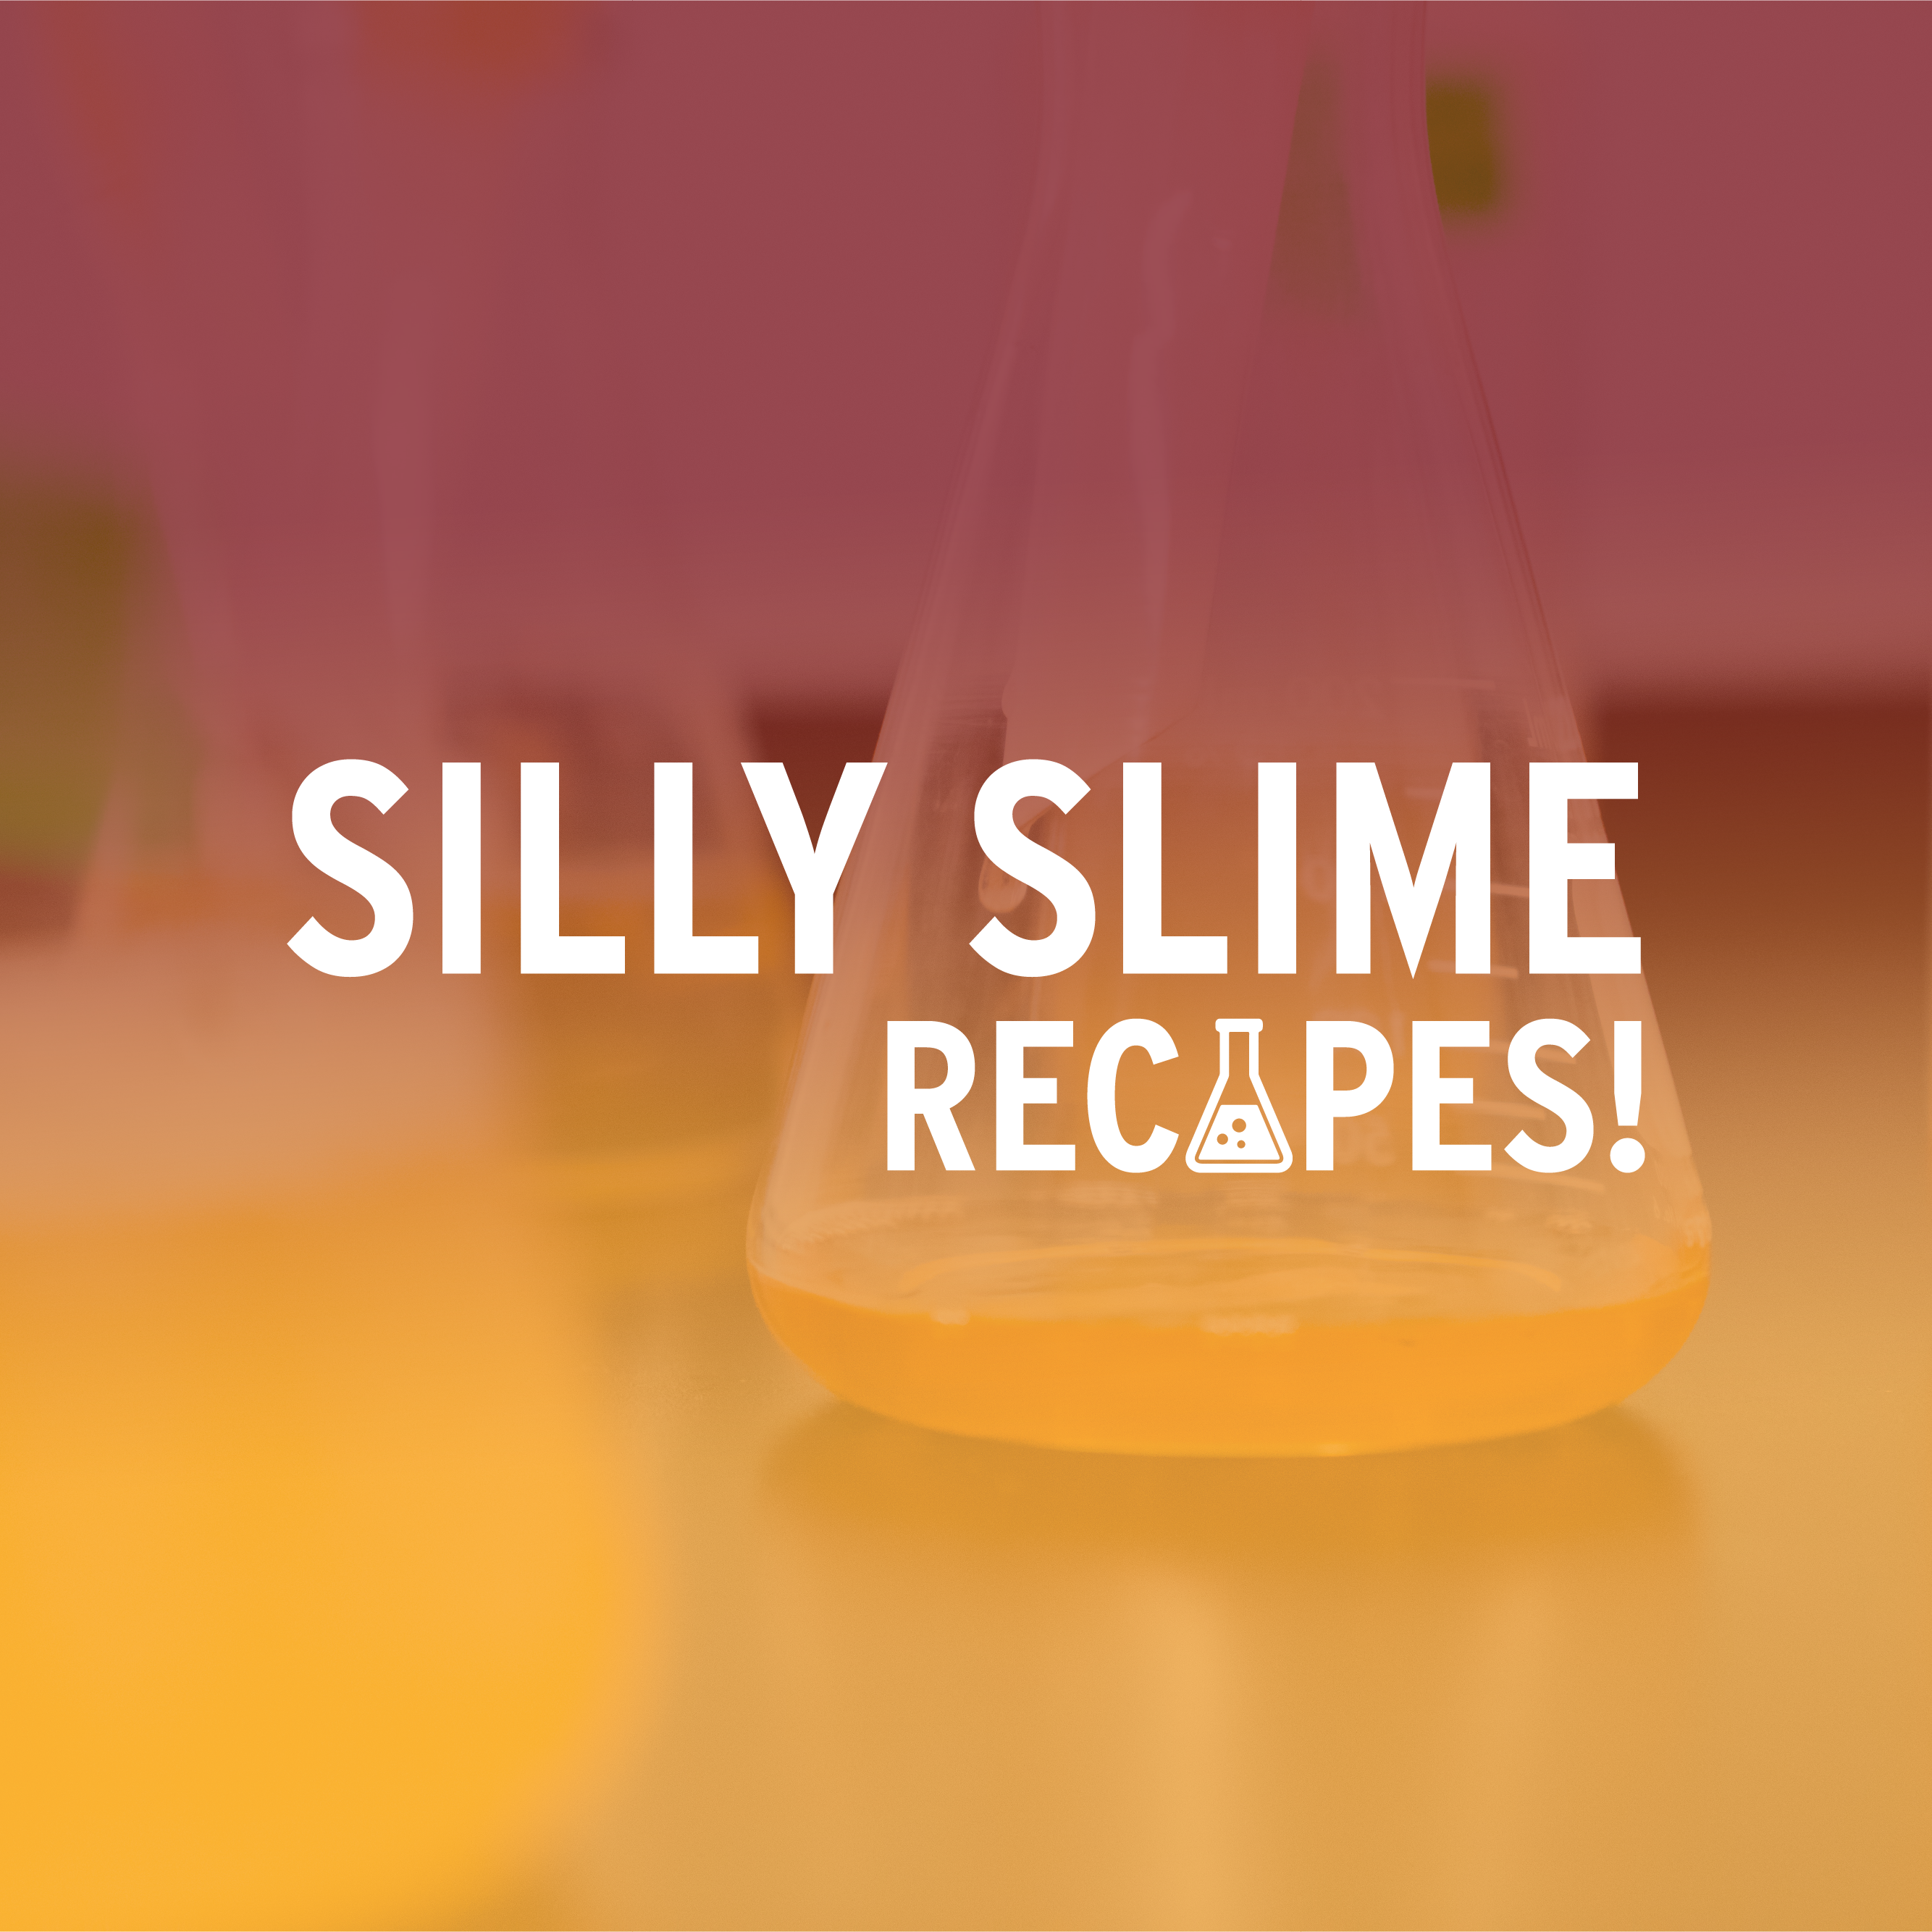 Silly Slime Recipes